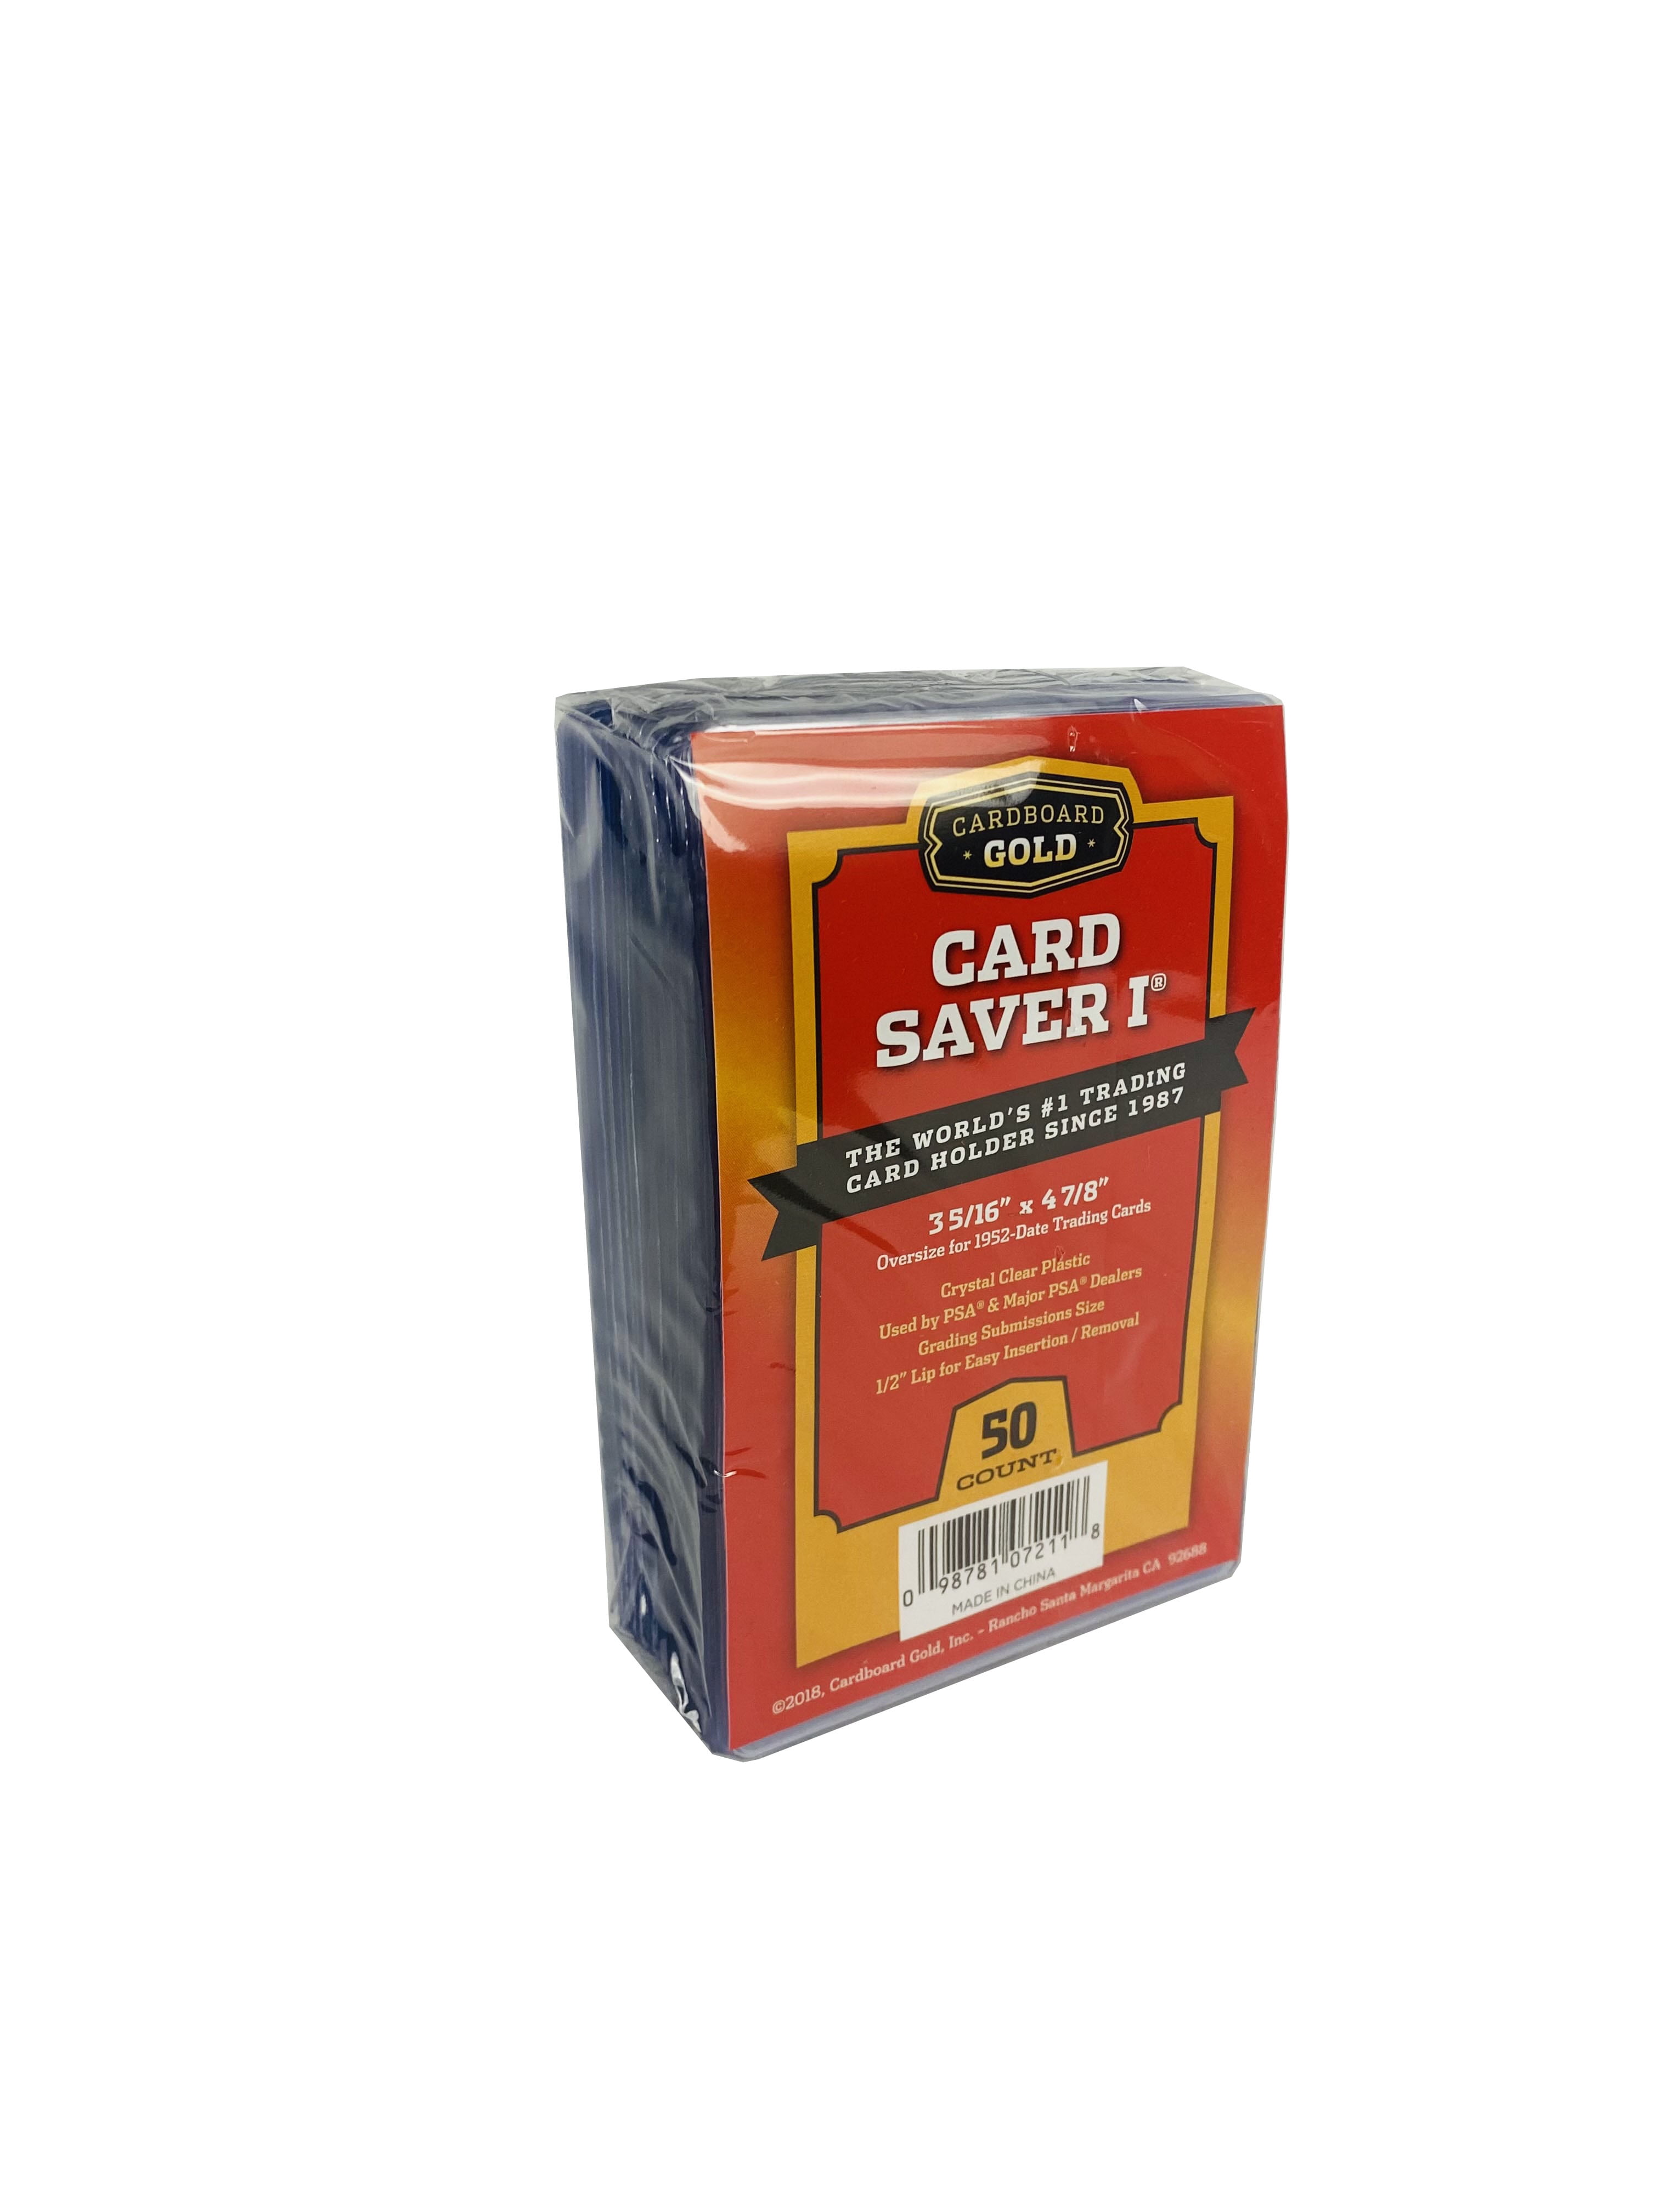 200ct Card Saver 1 in RED Storage BOX - Cs1 Graded Card Submits By  Cardboard Gold 